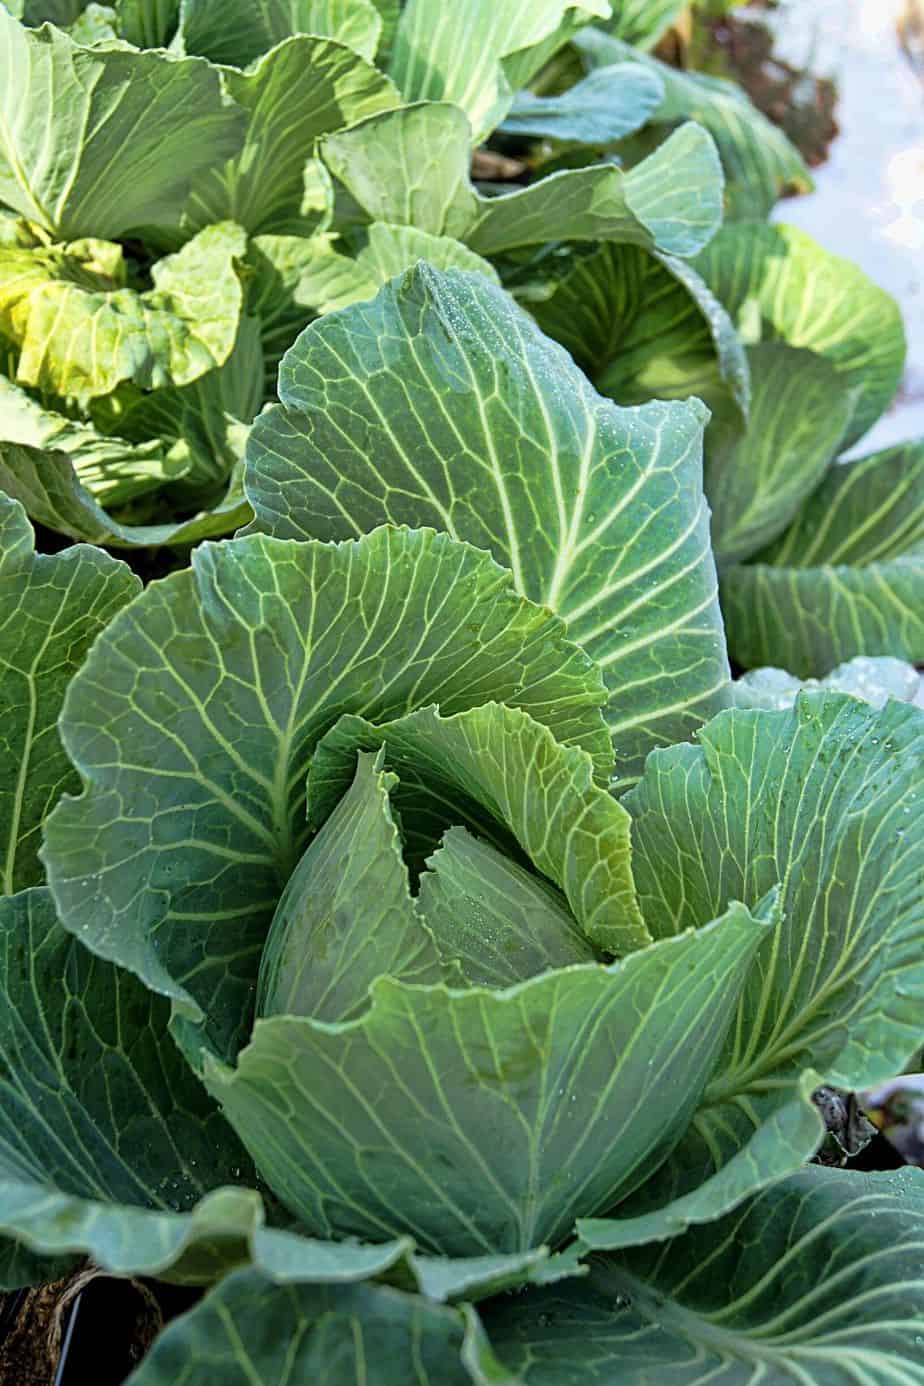 Despite being a challenging plant to grow, you can plant Cabbage in your northeast-facing garden